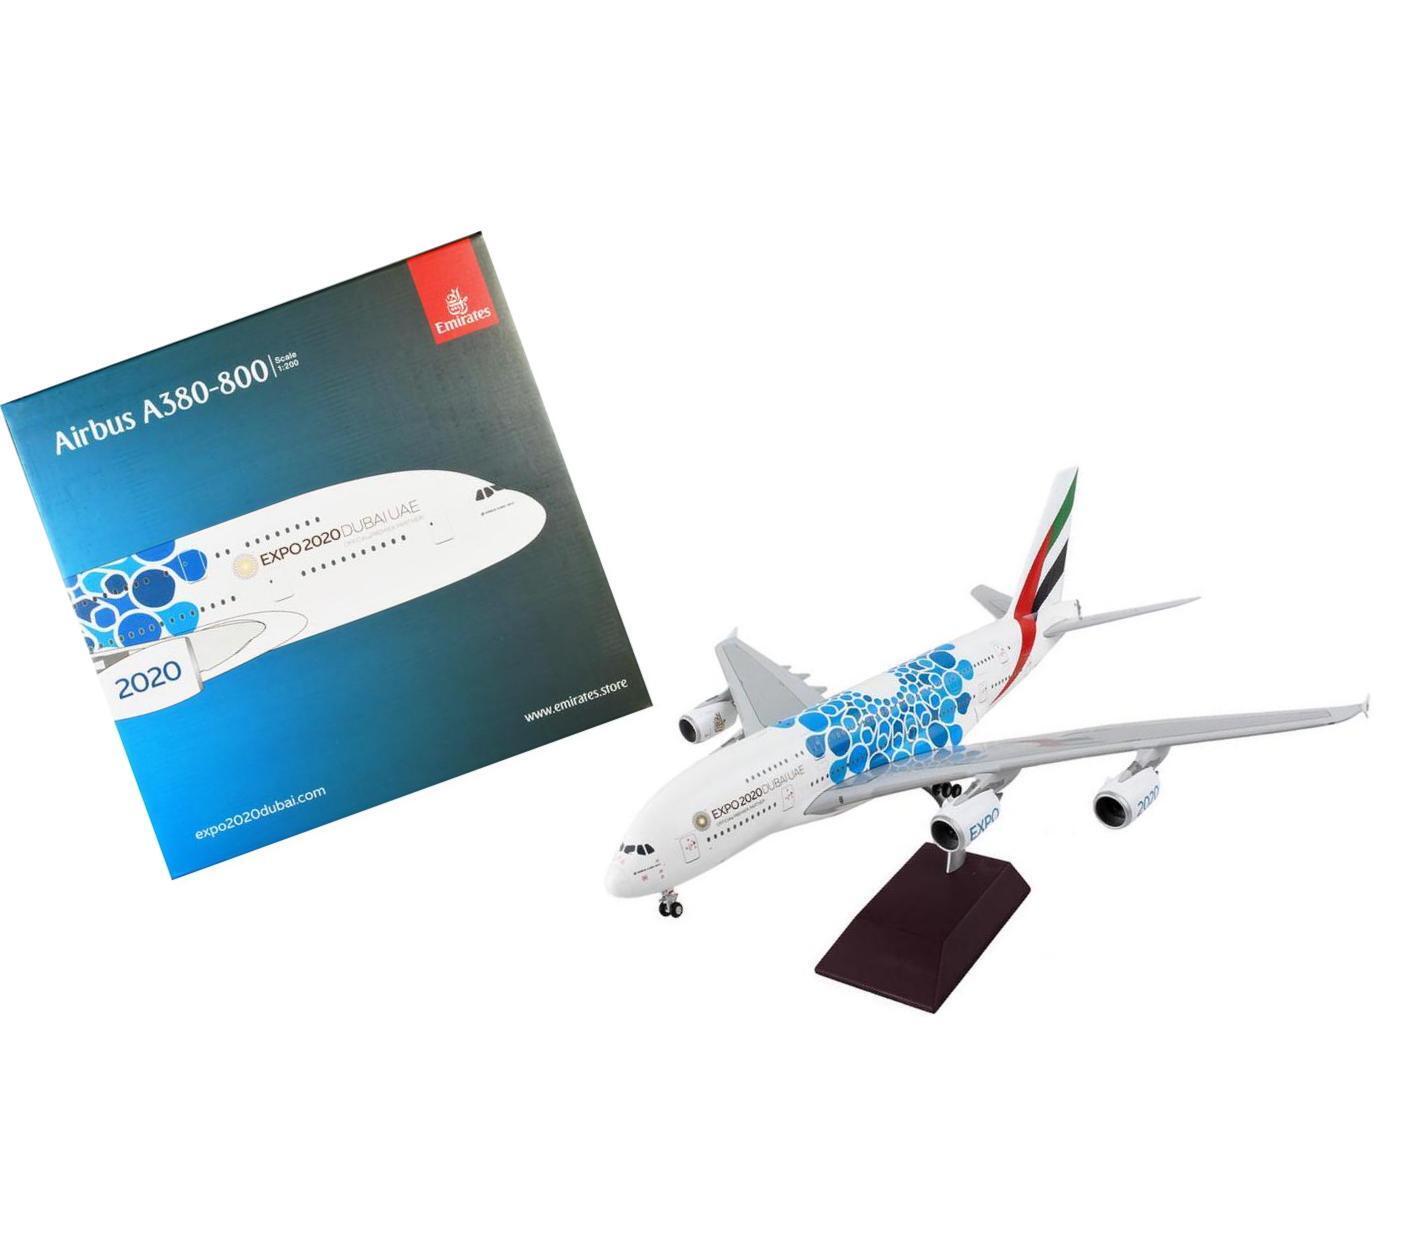 Airbus A380-800 Commercial Aircraft Emirates Airlines - Dubai Expo 2020 White By